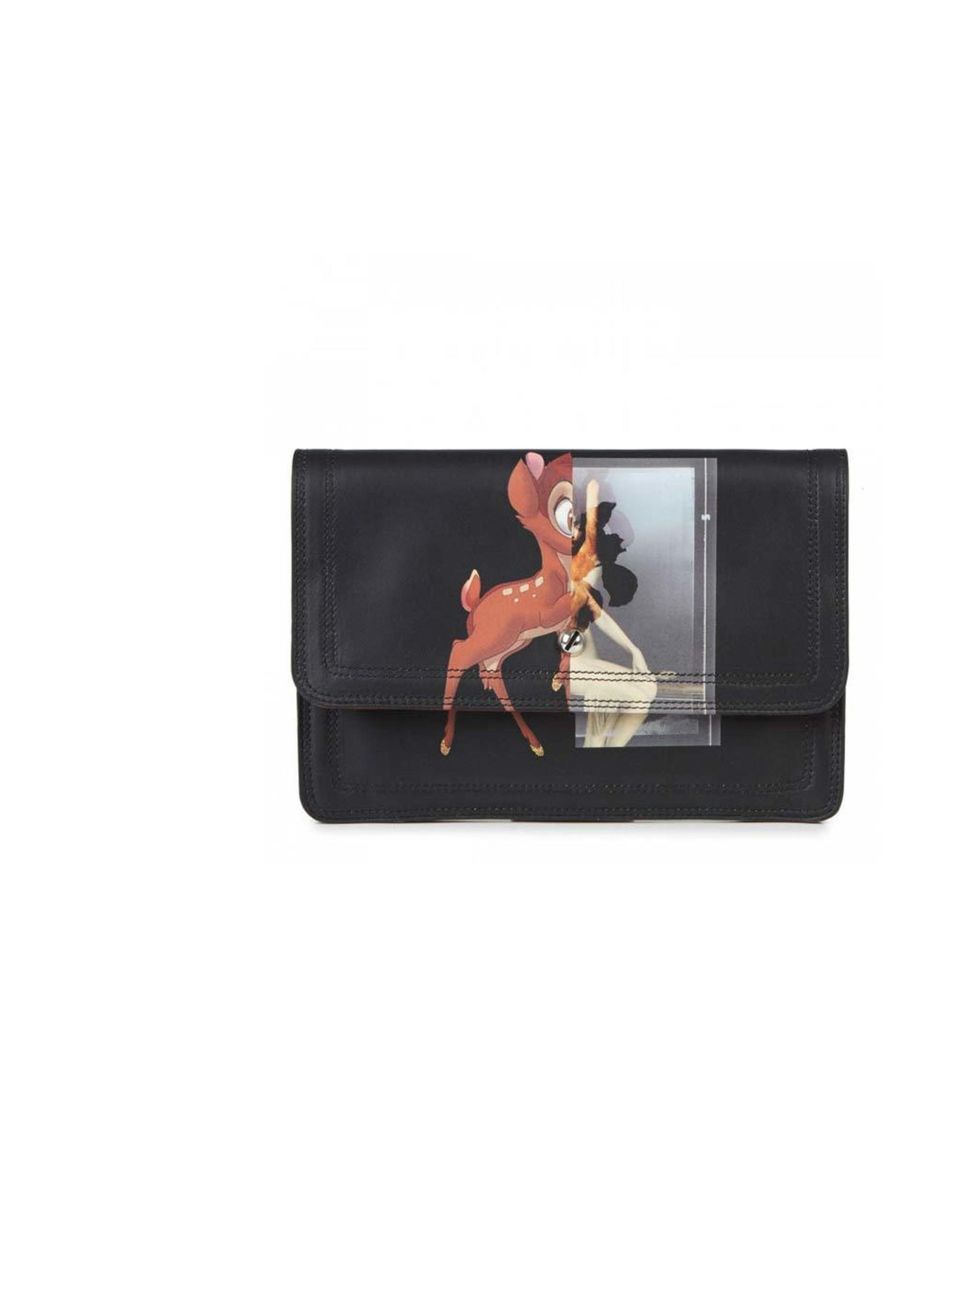 <p>When Shakespeare said 'I burn, I pine, I perish', I think he was probably talking about this Bambi-print clutch bag.</p><p>Givenchy clutch, £1340 at <a href="http://www.harveynichols.com/new-in/new-in-categories/new-in-women/s456910-bambi-print-leather